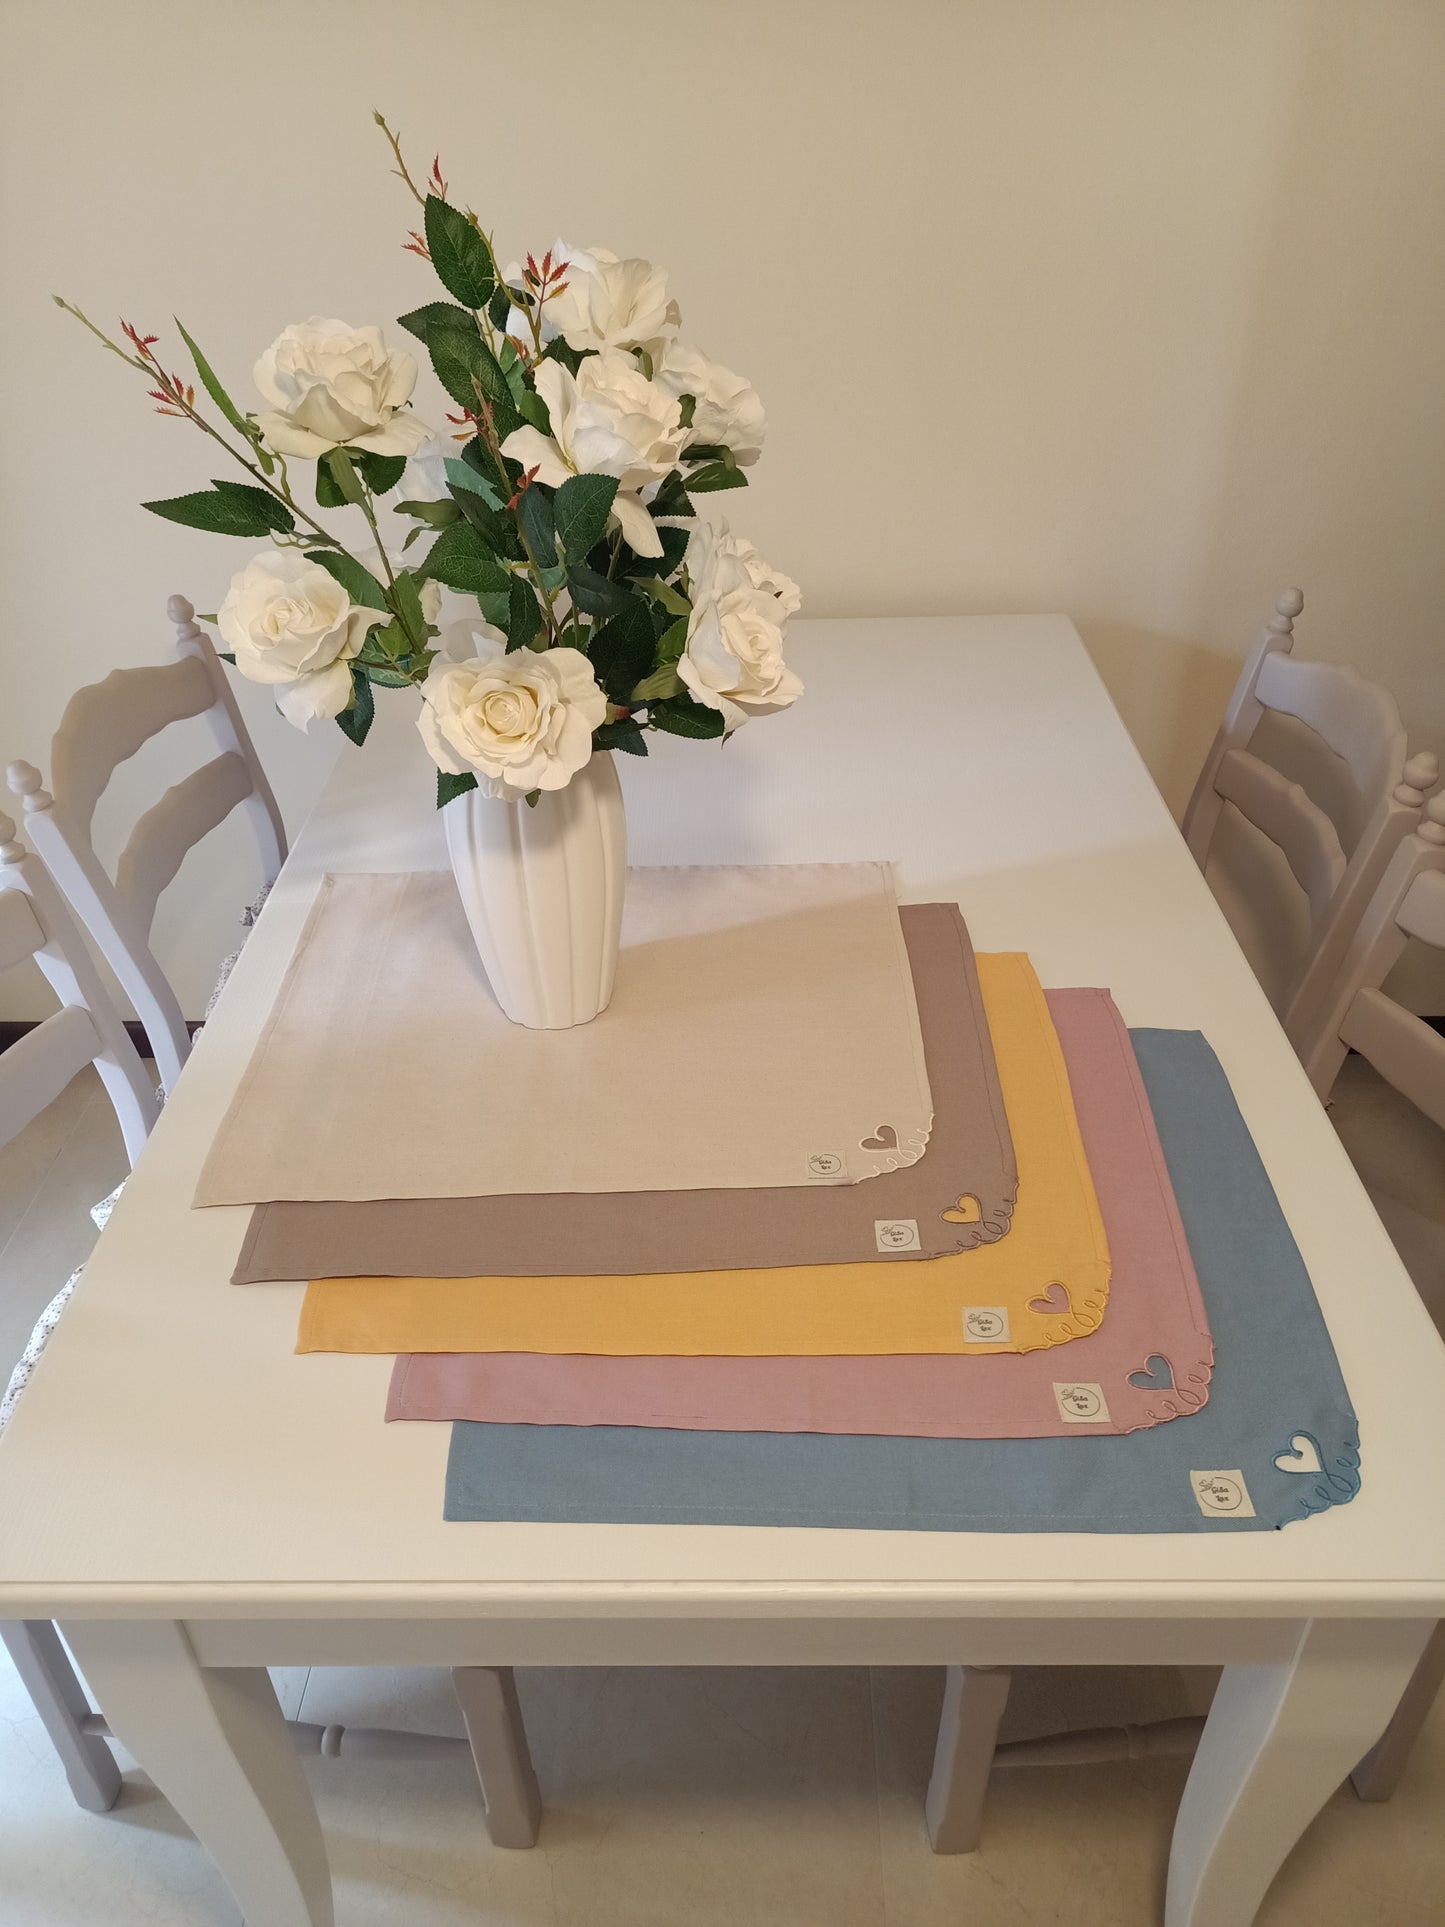 Cotton Basic American Placemats